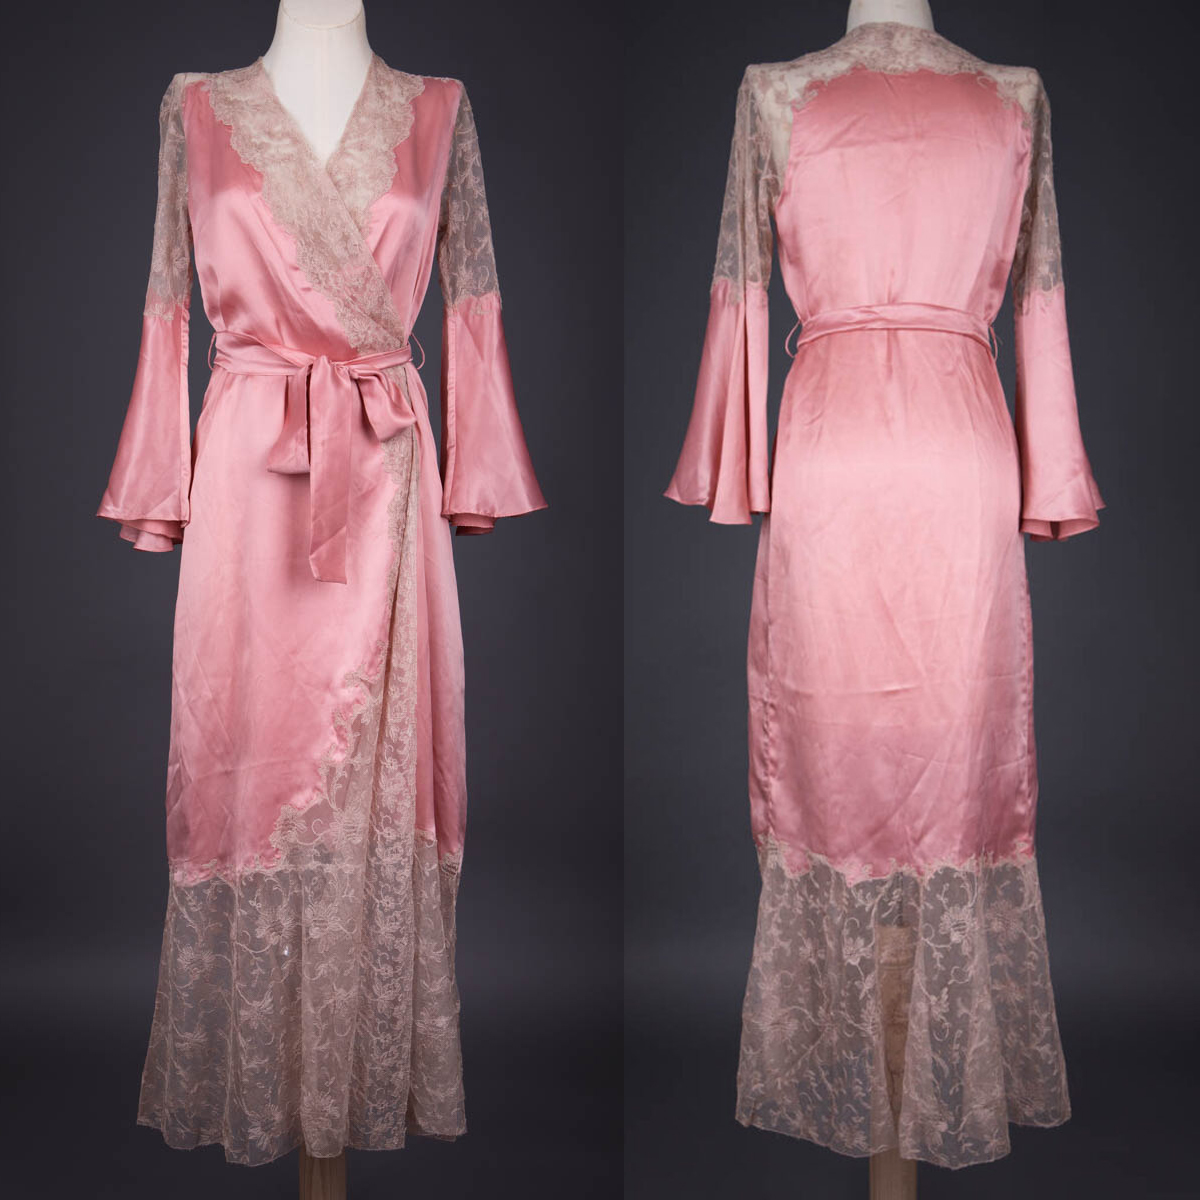 This c. 1940s full-length robe is made in pink rayon satin and embellished with appliquéd Schiffli embroidered tulle at the collar, shoulders, and hem. Explore this piece in further detail on our website! underpinningsmuseum.com/museum-collect…